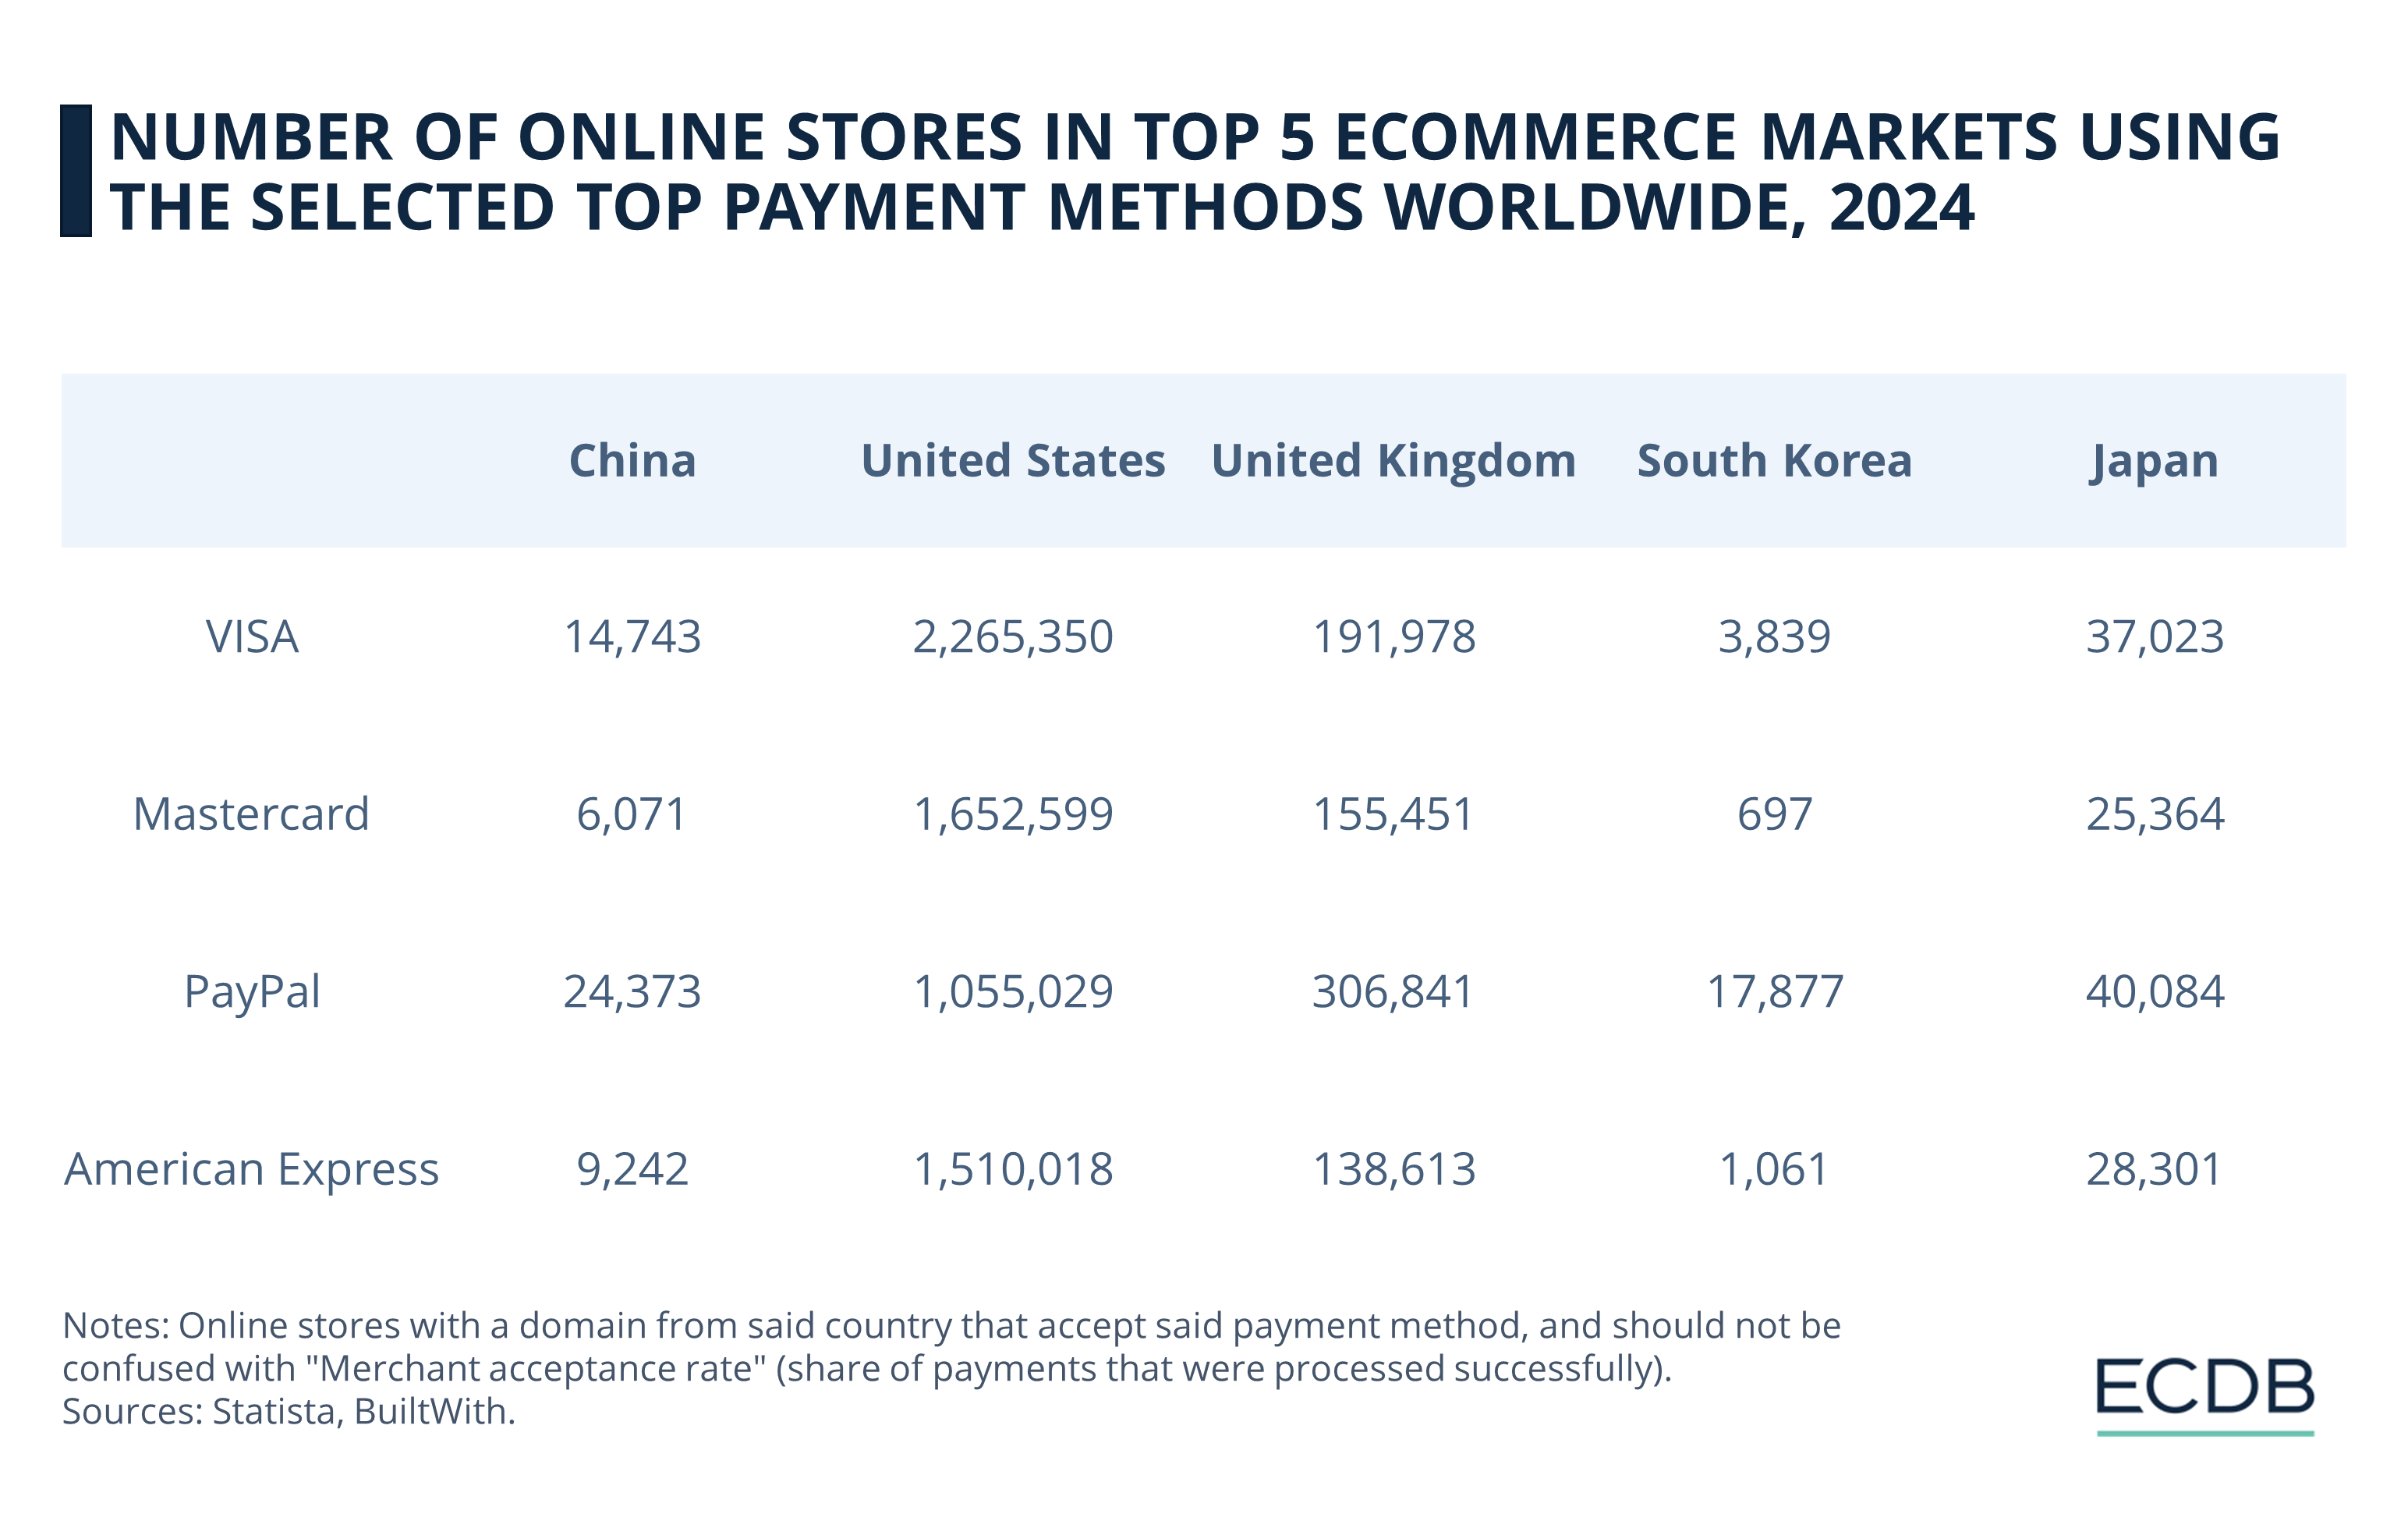 Number of Online Stores in Top 5 eCommerce Markets Using the Selected Top Payment Methods Worldwide, 2024